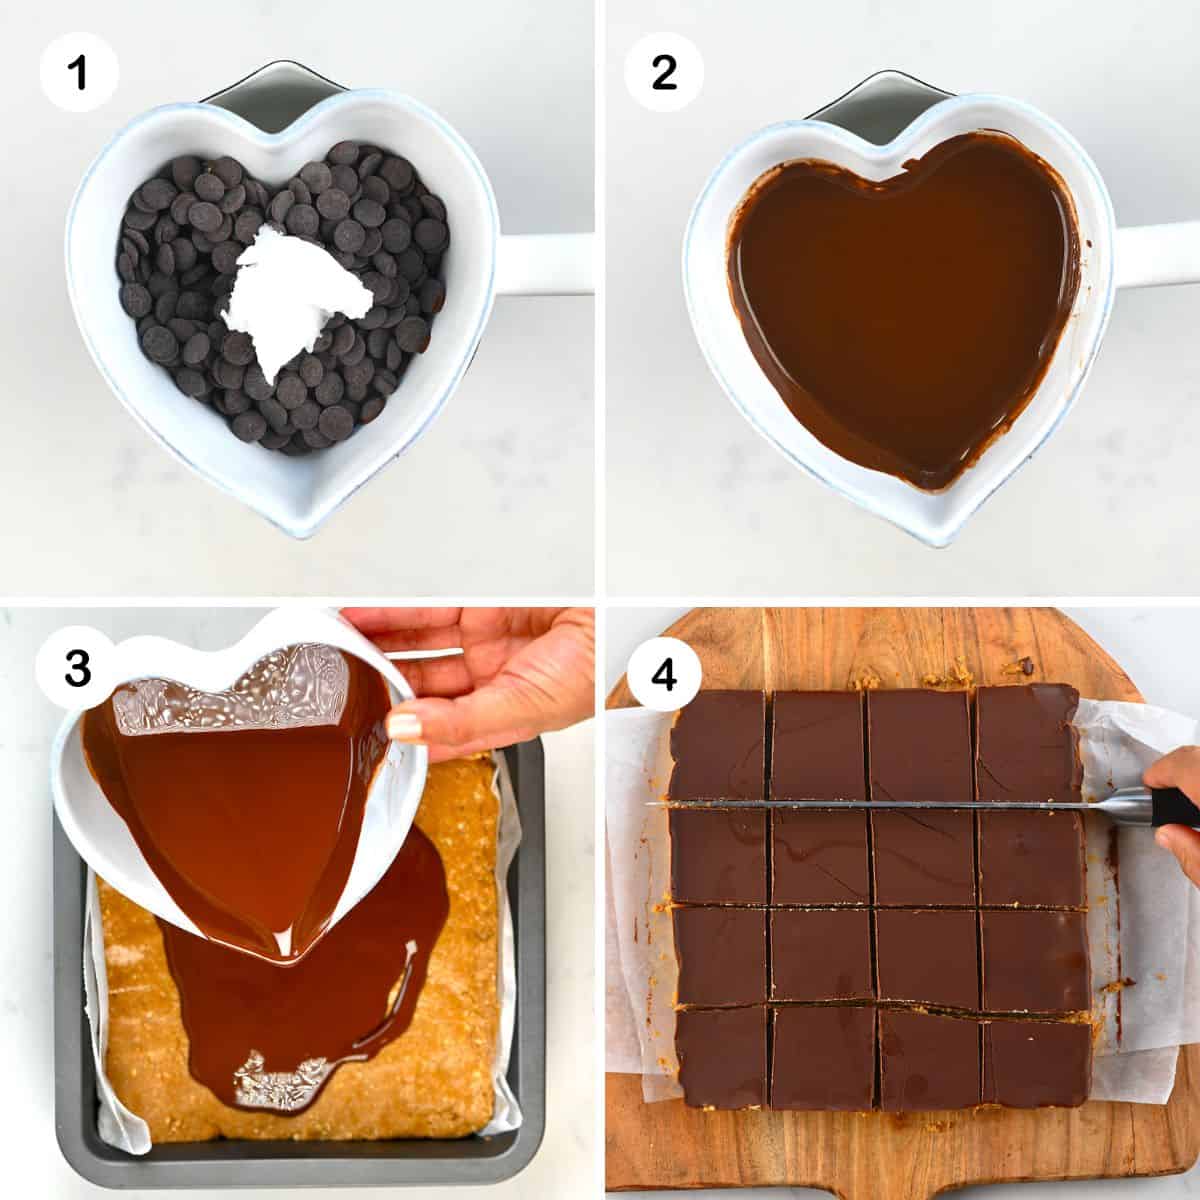 Steps for melting chocolate and covering peanut butter bars